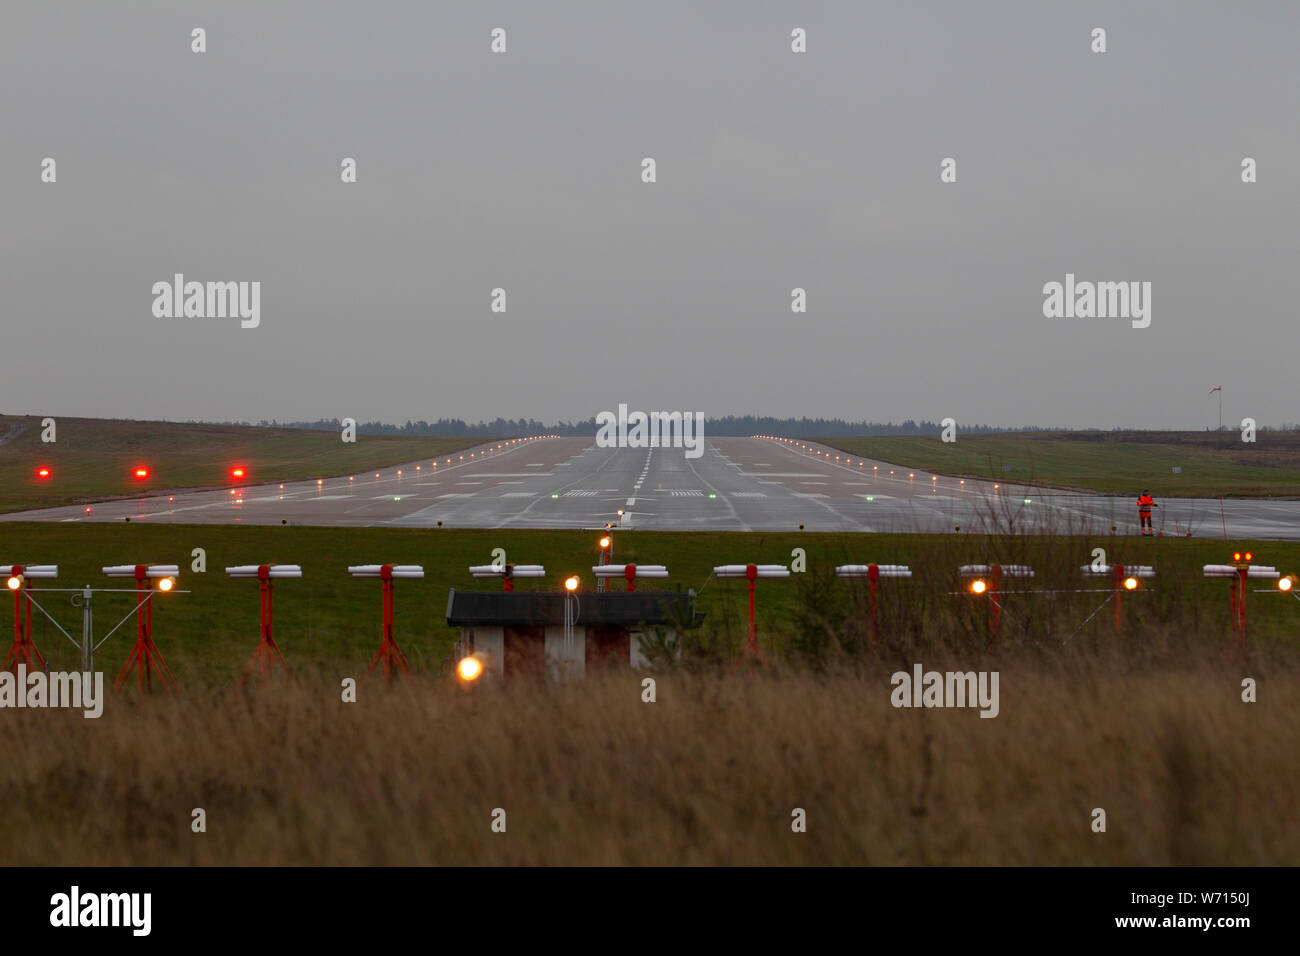 Runway on airfield one evening without airplane Stock Photo